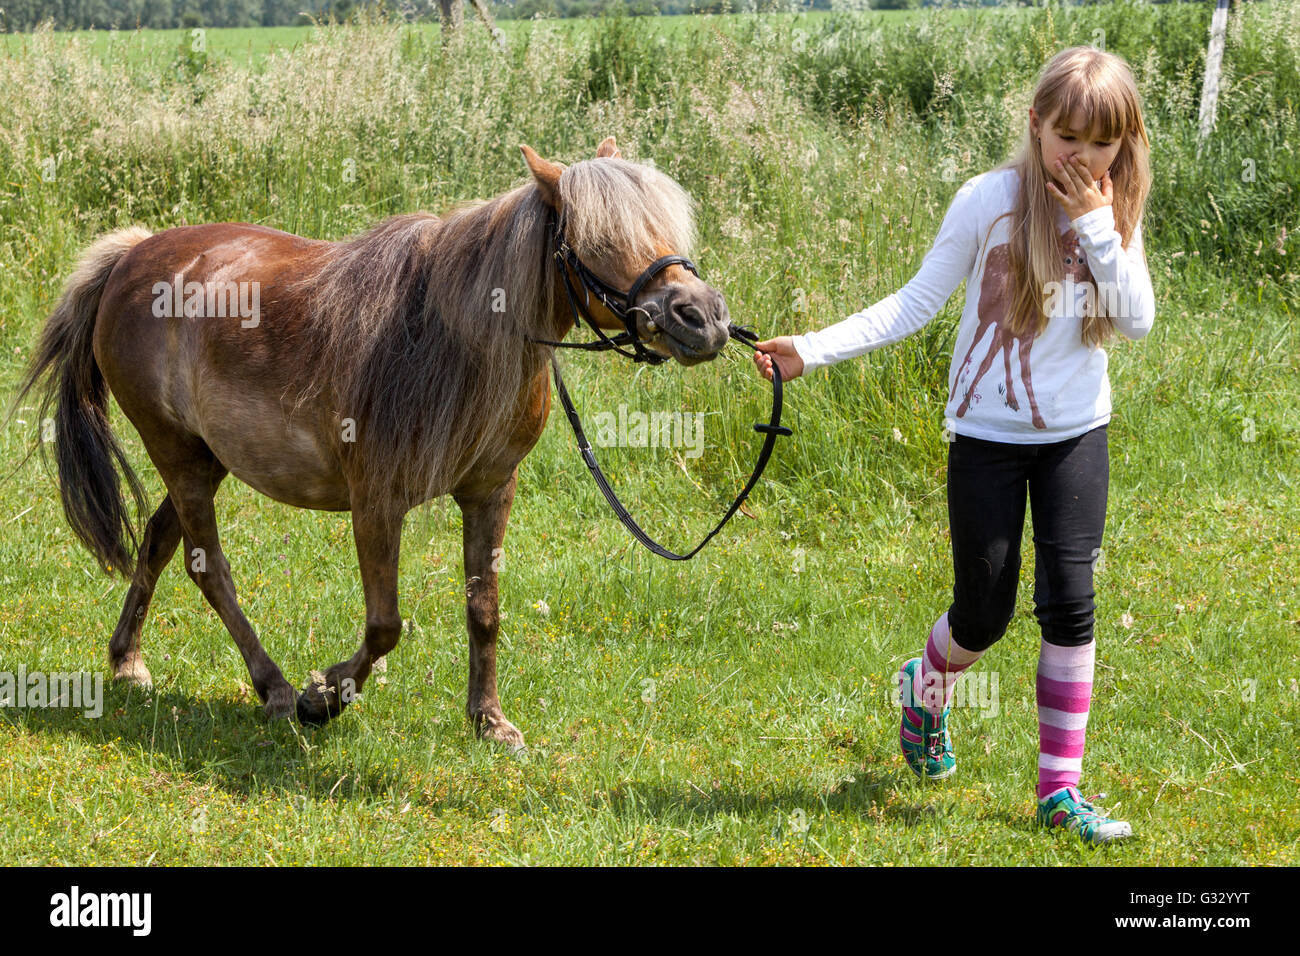 Little girl pony, 6- 7 year old child, lead the pony by the bridle Stock Photo